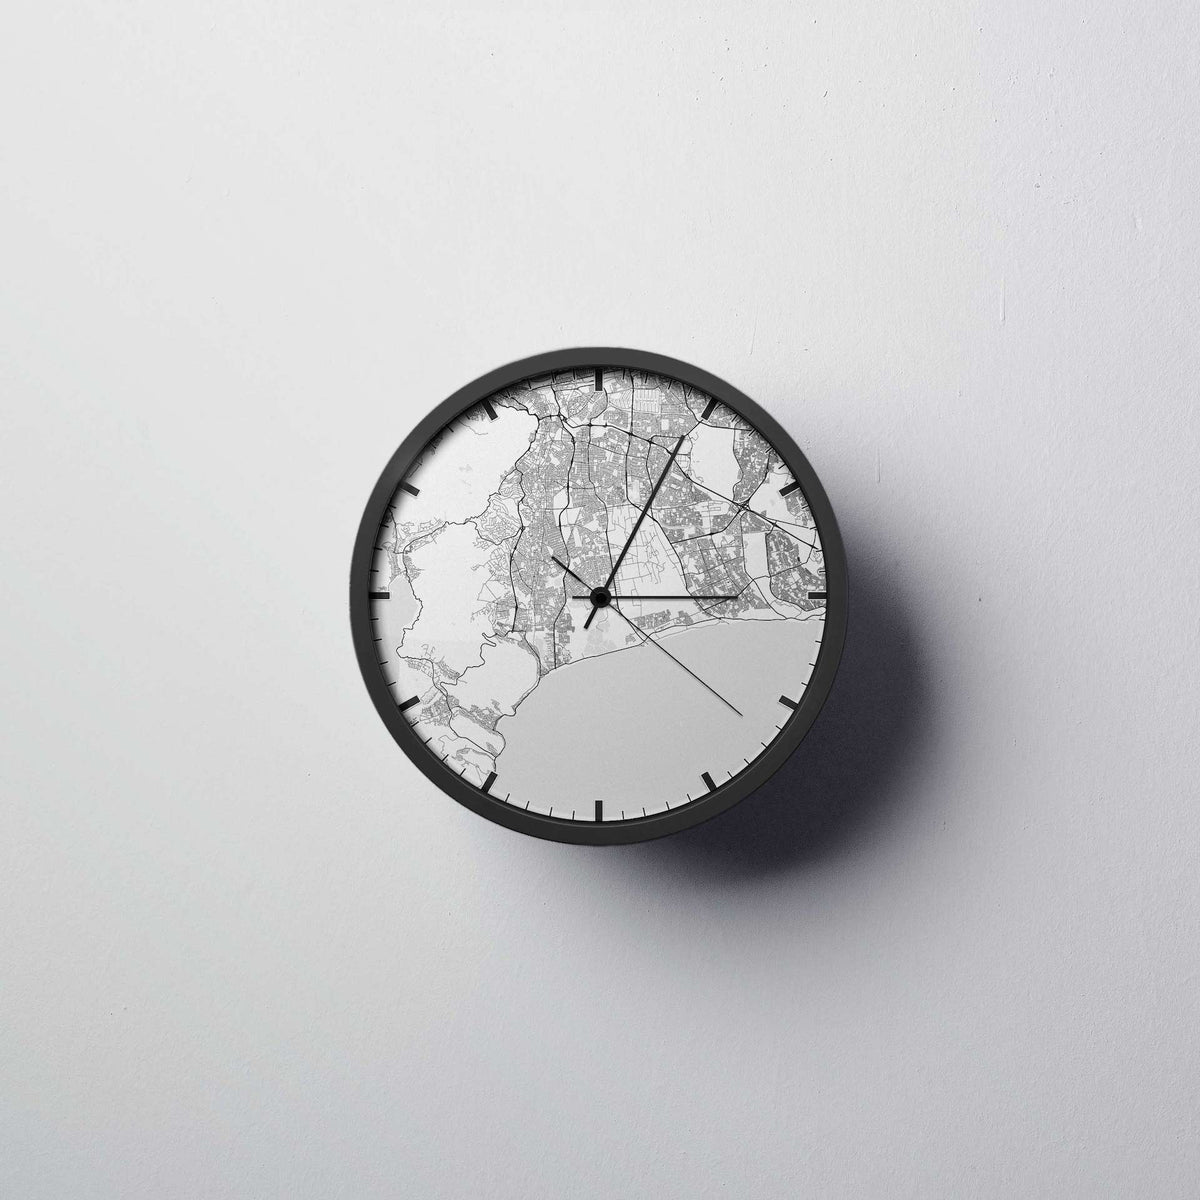 Cape Town Wall Clock - Point Two Design